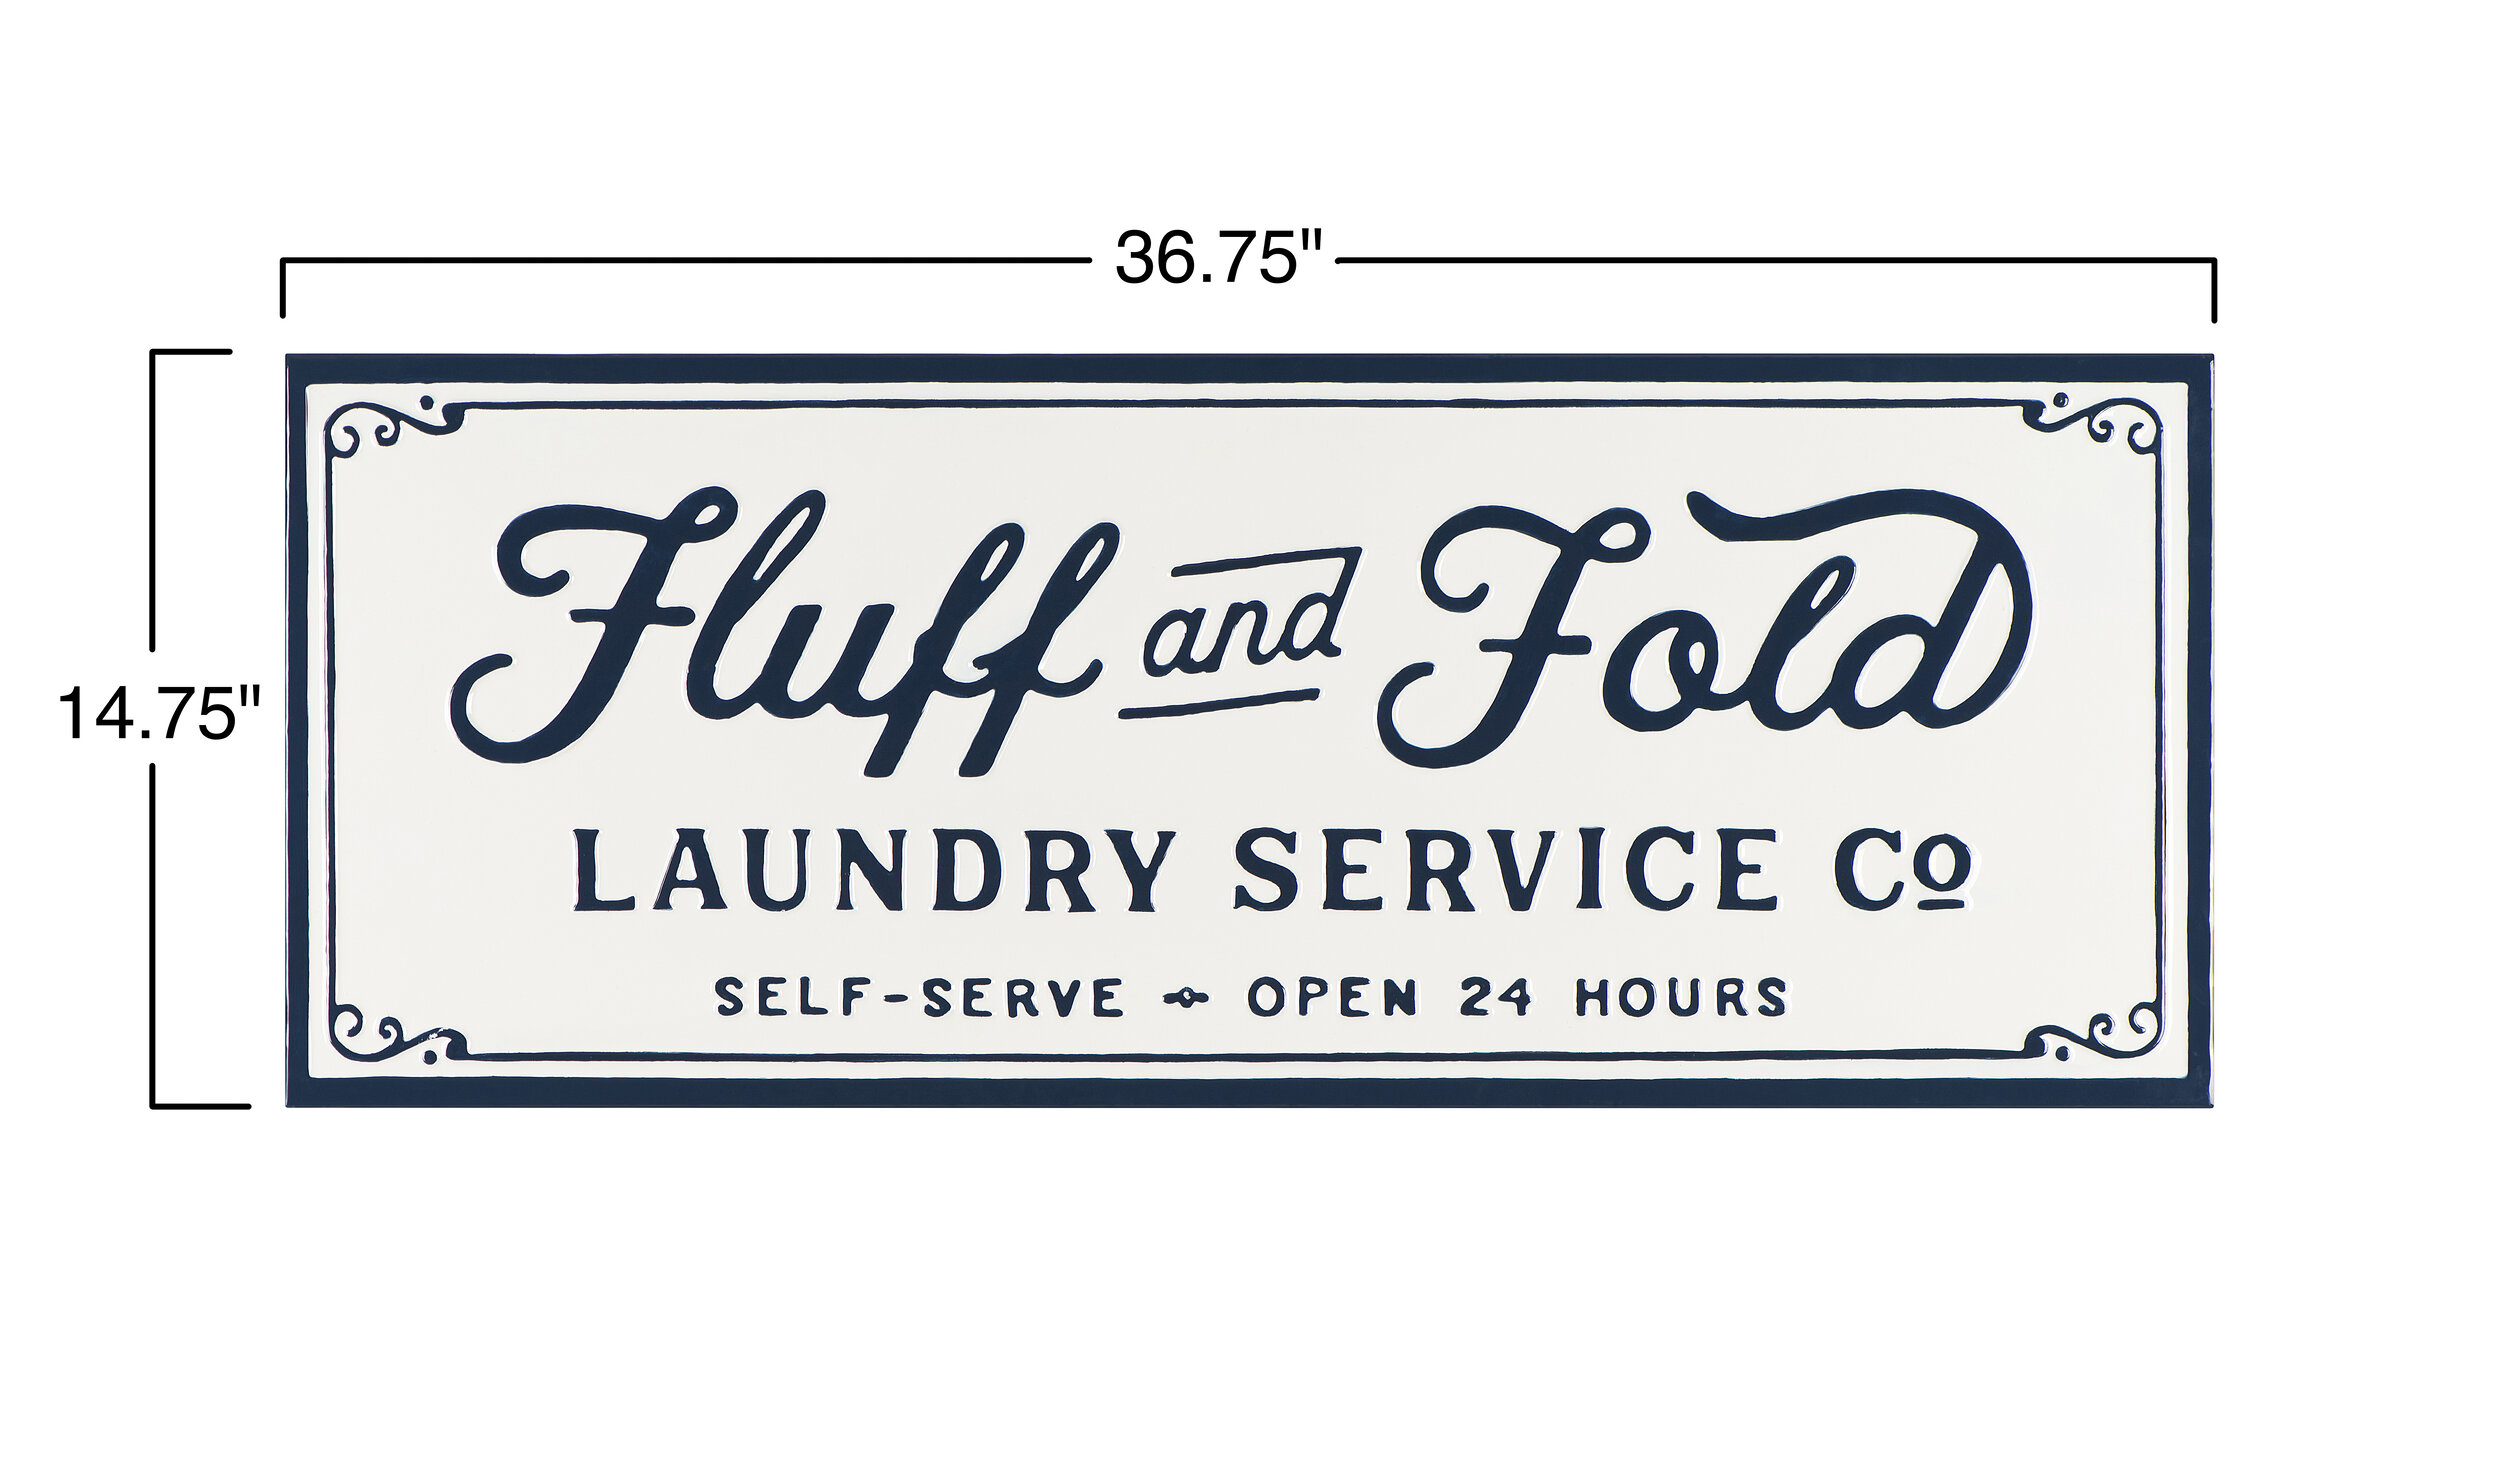 Fluff & fold LAUNDRY 15c service open 24 hours country wall decor wood sign 2 pc